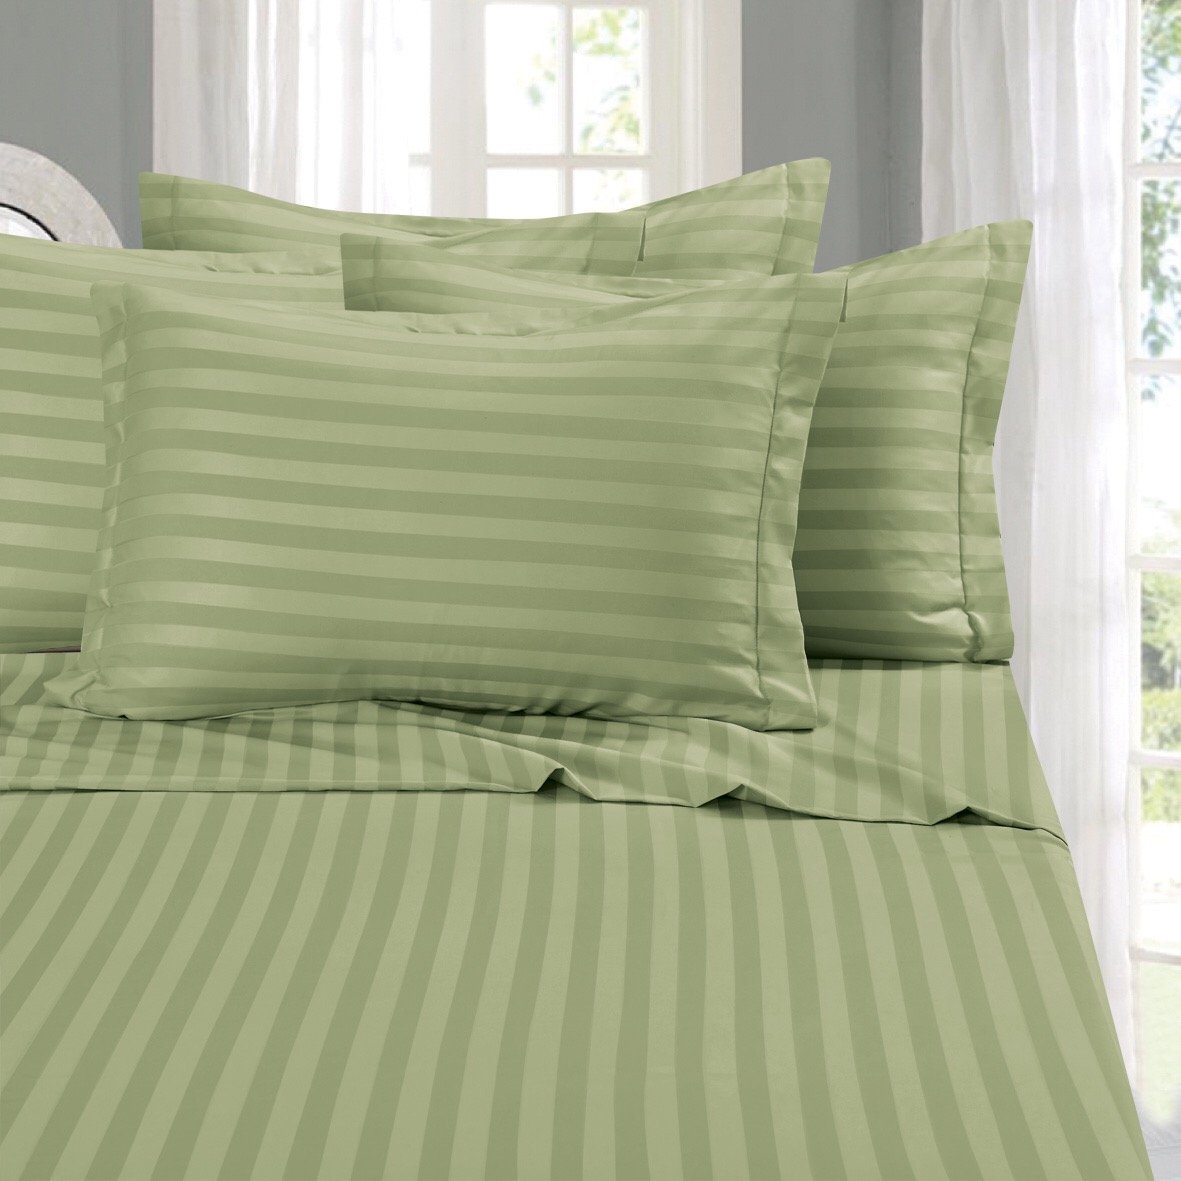 HOT Amazon Deal: 1500 Thread Count Egyptian Luxurious Sheet Set Only $22.99 – 81% Savings